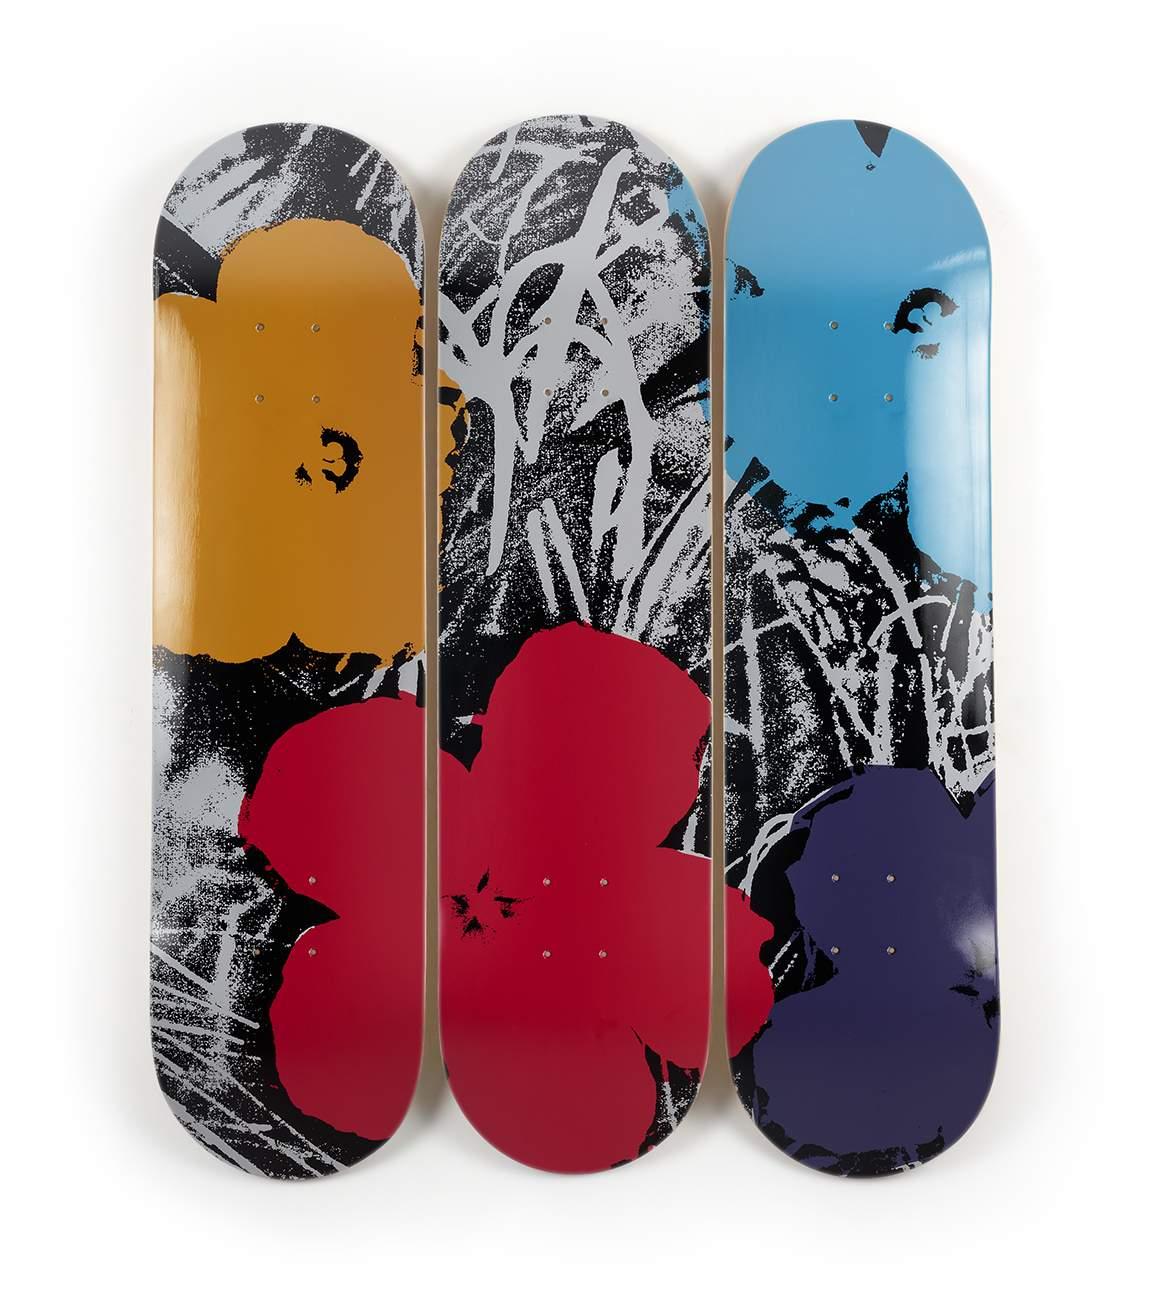 Andy Warhol Abstract Print - FLOWERS (GREY/RED) Limited Edition Skate Deck Modern Design Pop American Icon